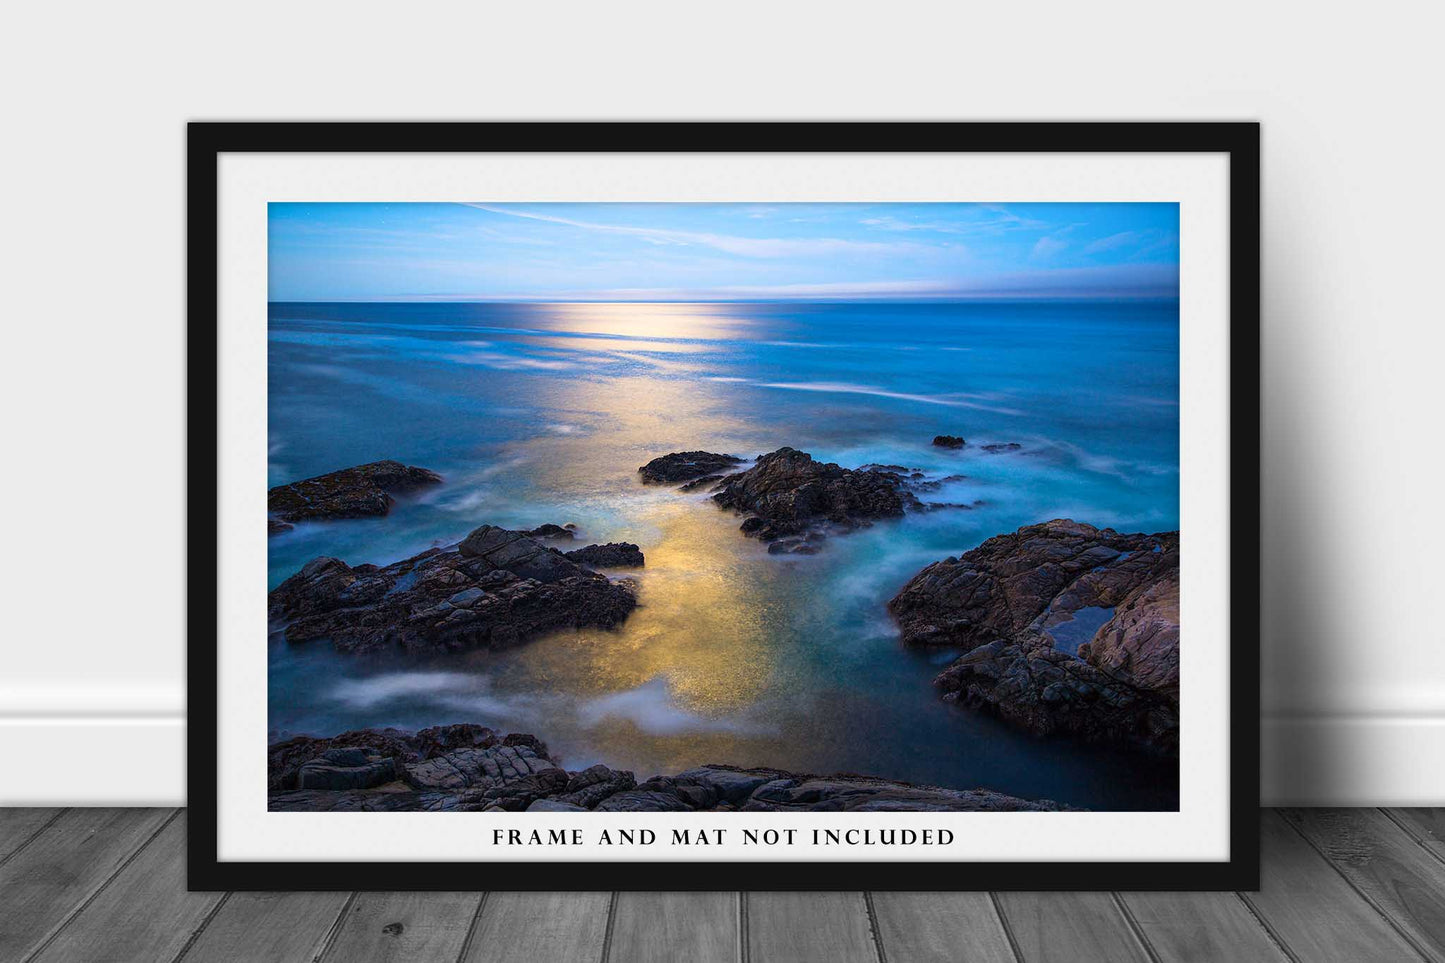 Coastal Photography Print - Picture of Moonlight Reflection on Pacific Ocean at Big Sur California Decor West Coast Wall Art Photo Artwork